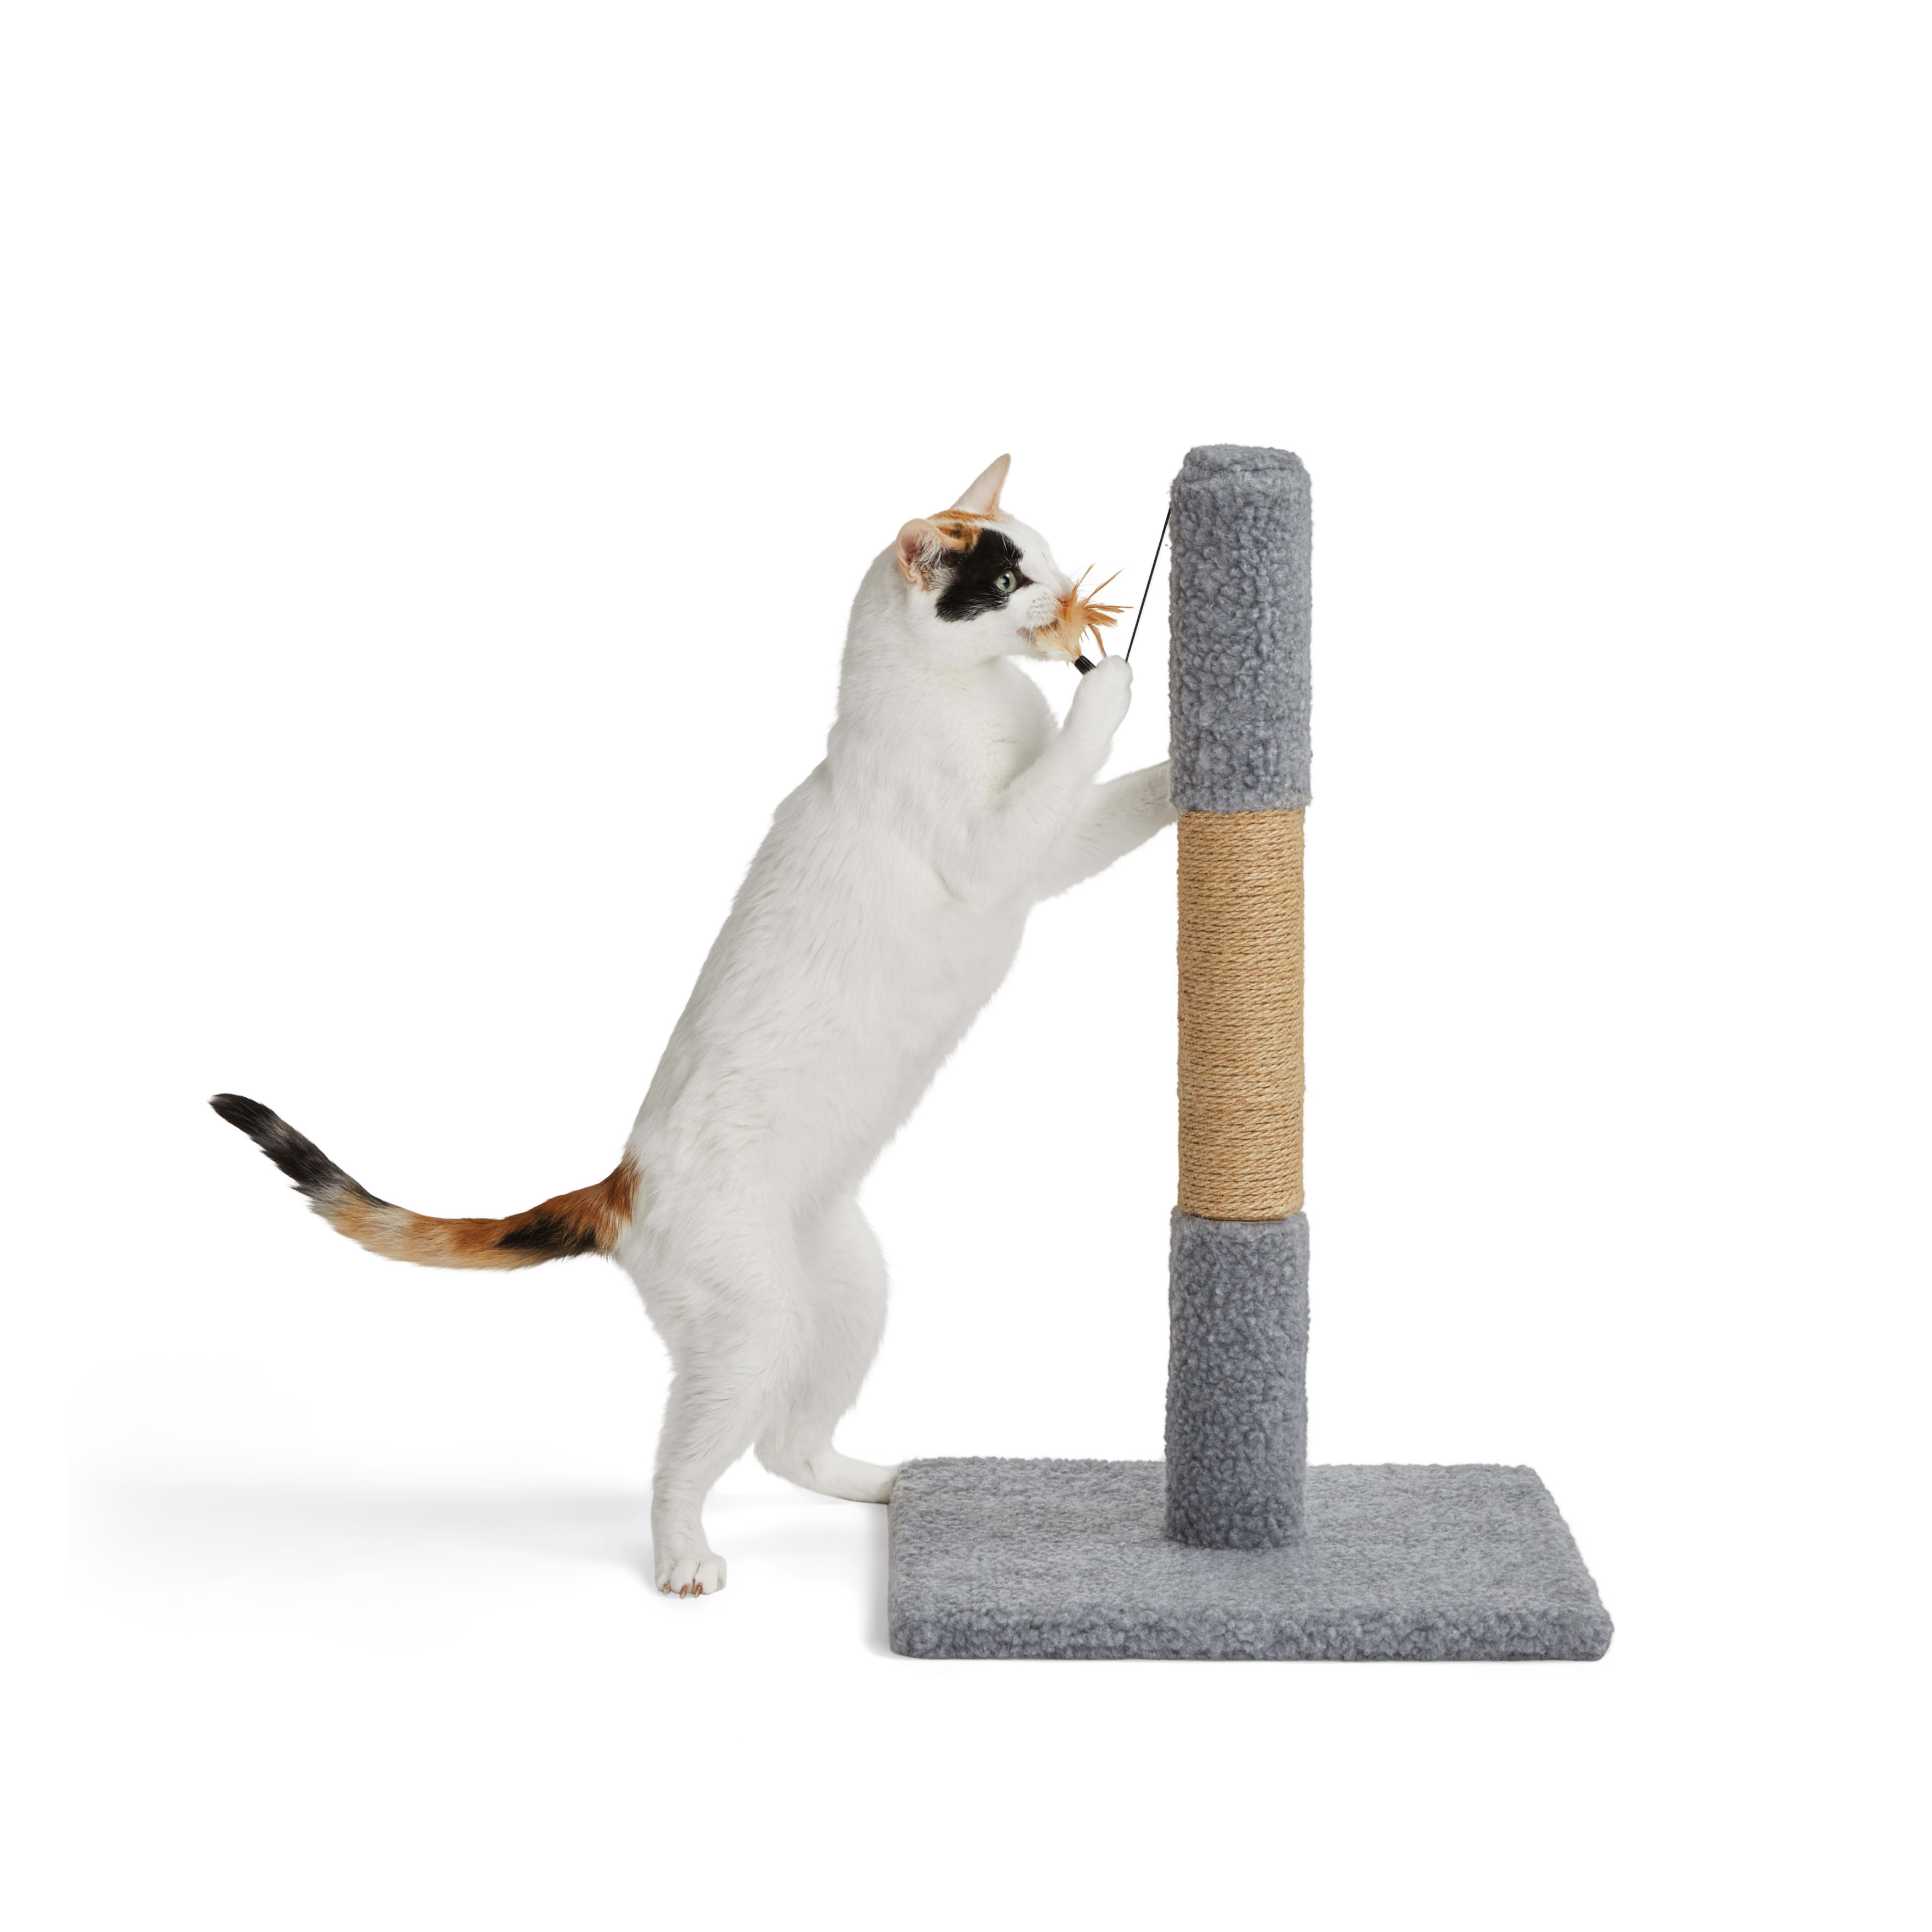 EveryYay Essentials Scratchin' The Surface Grey Post with Scratcher Cat Toy, 26" H, Gray